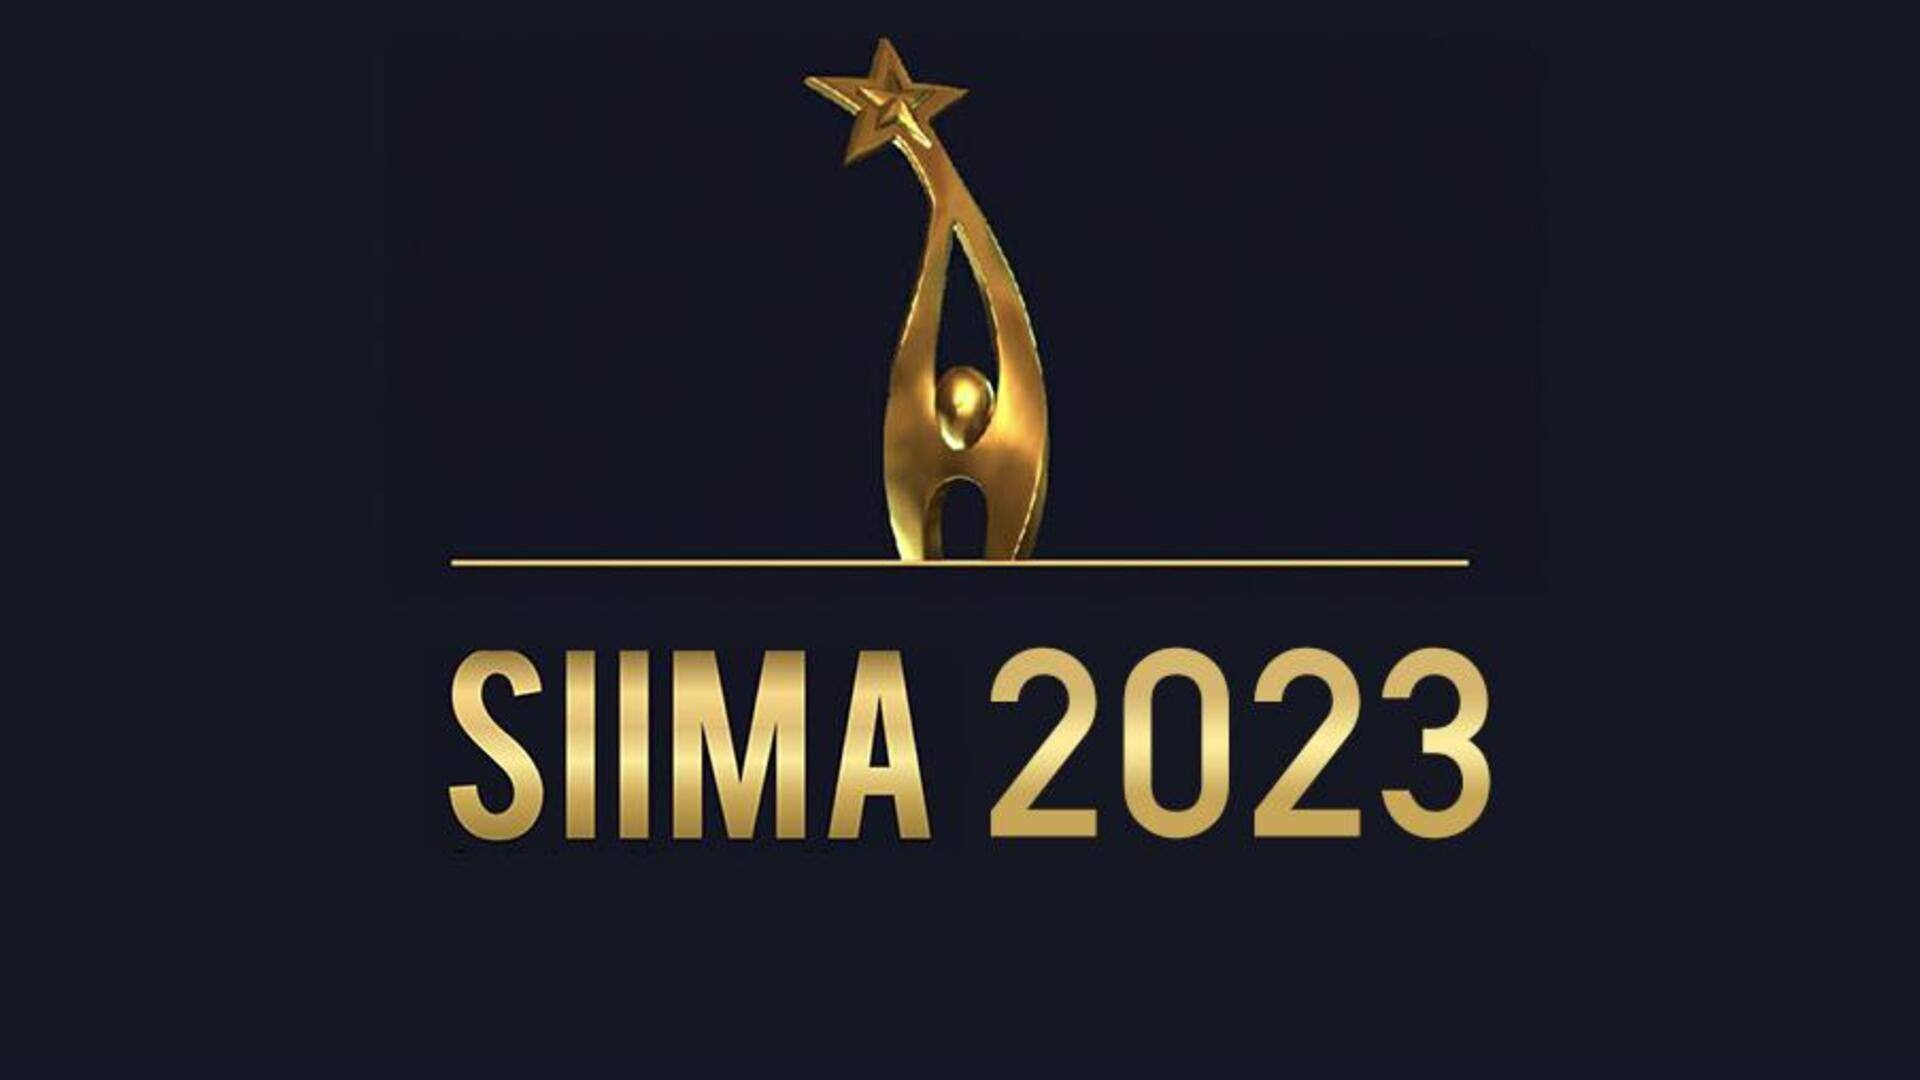 SIIMA 2023: Rana-Mrunal to host the ceremony; streaming details out